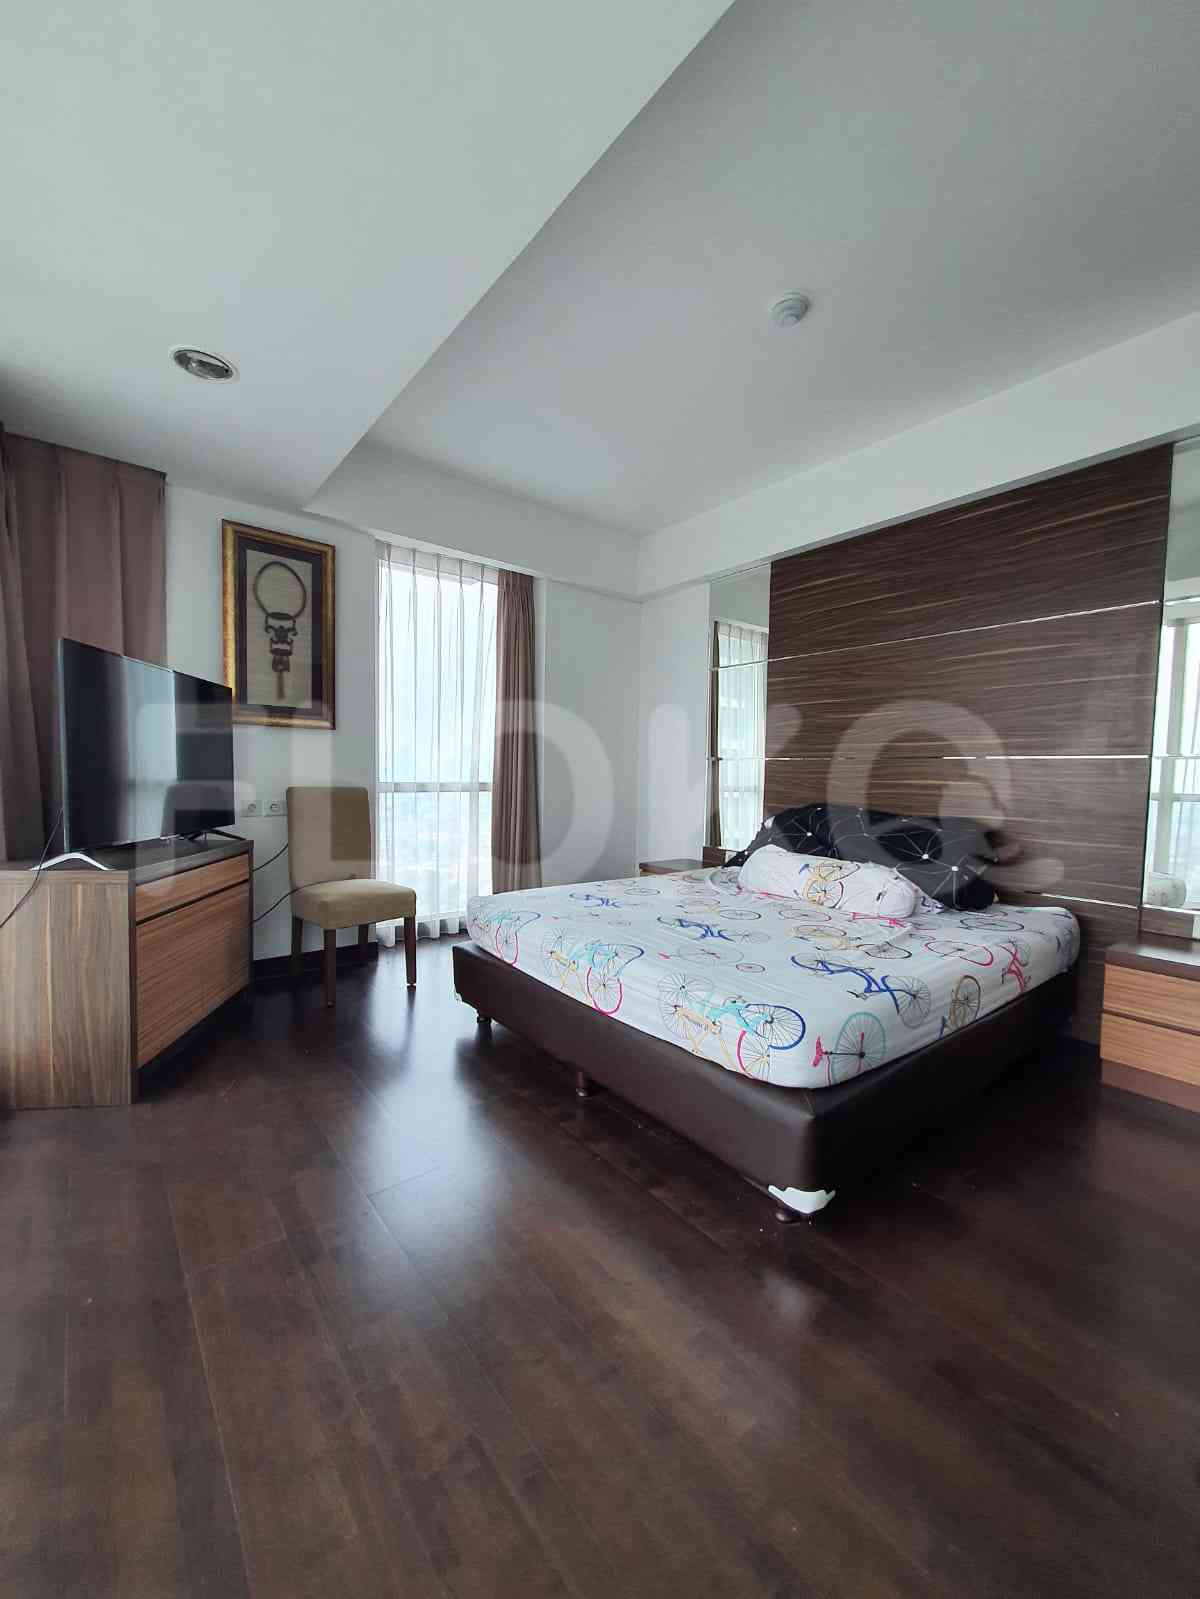 3 Bedroom on 15th Floor for Rent in Kemang Village Residence - fked84 6